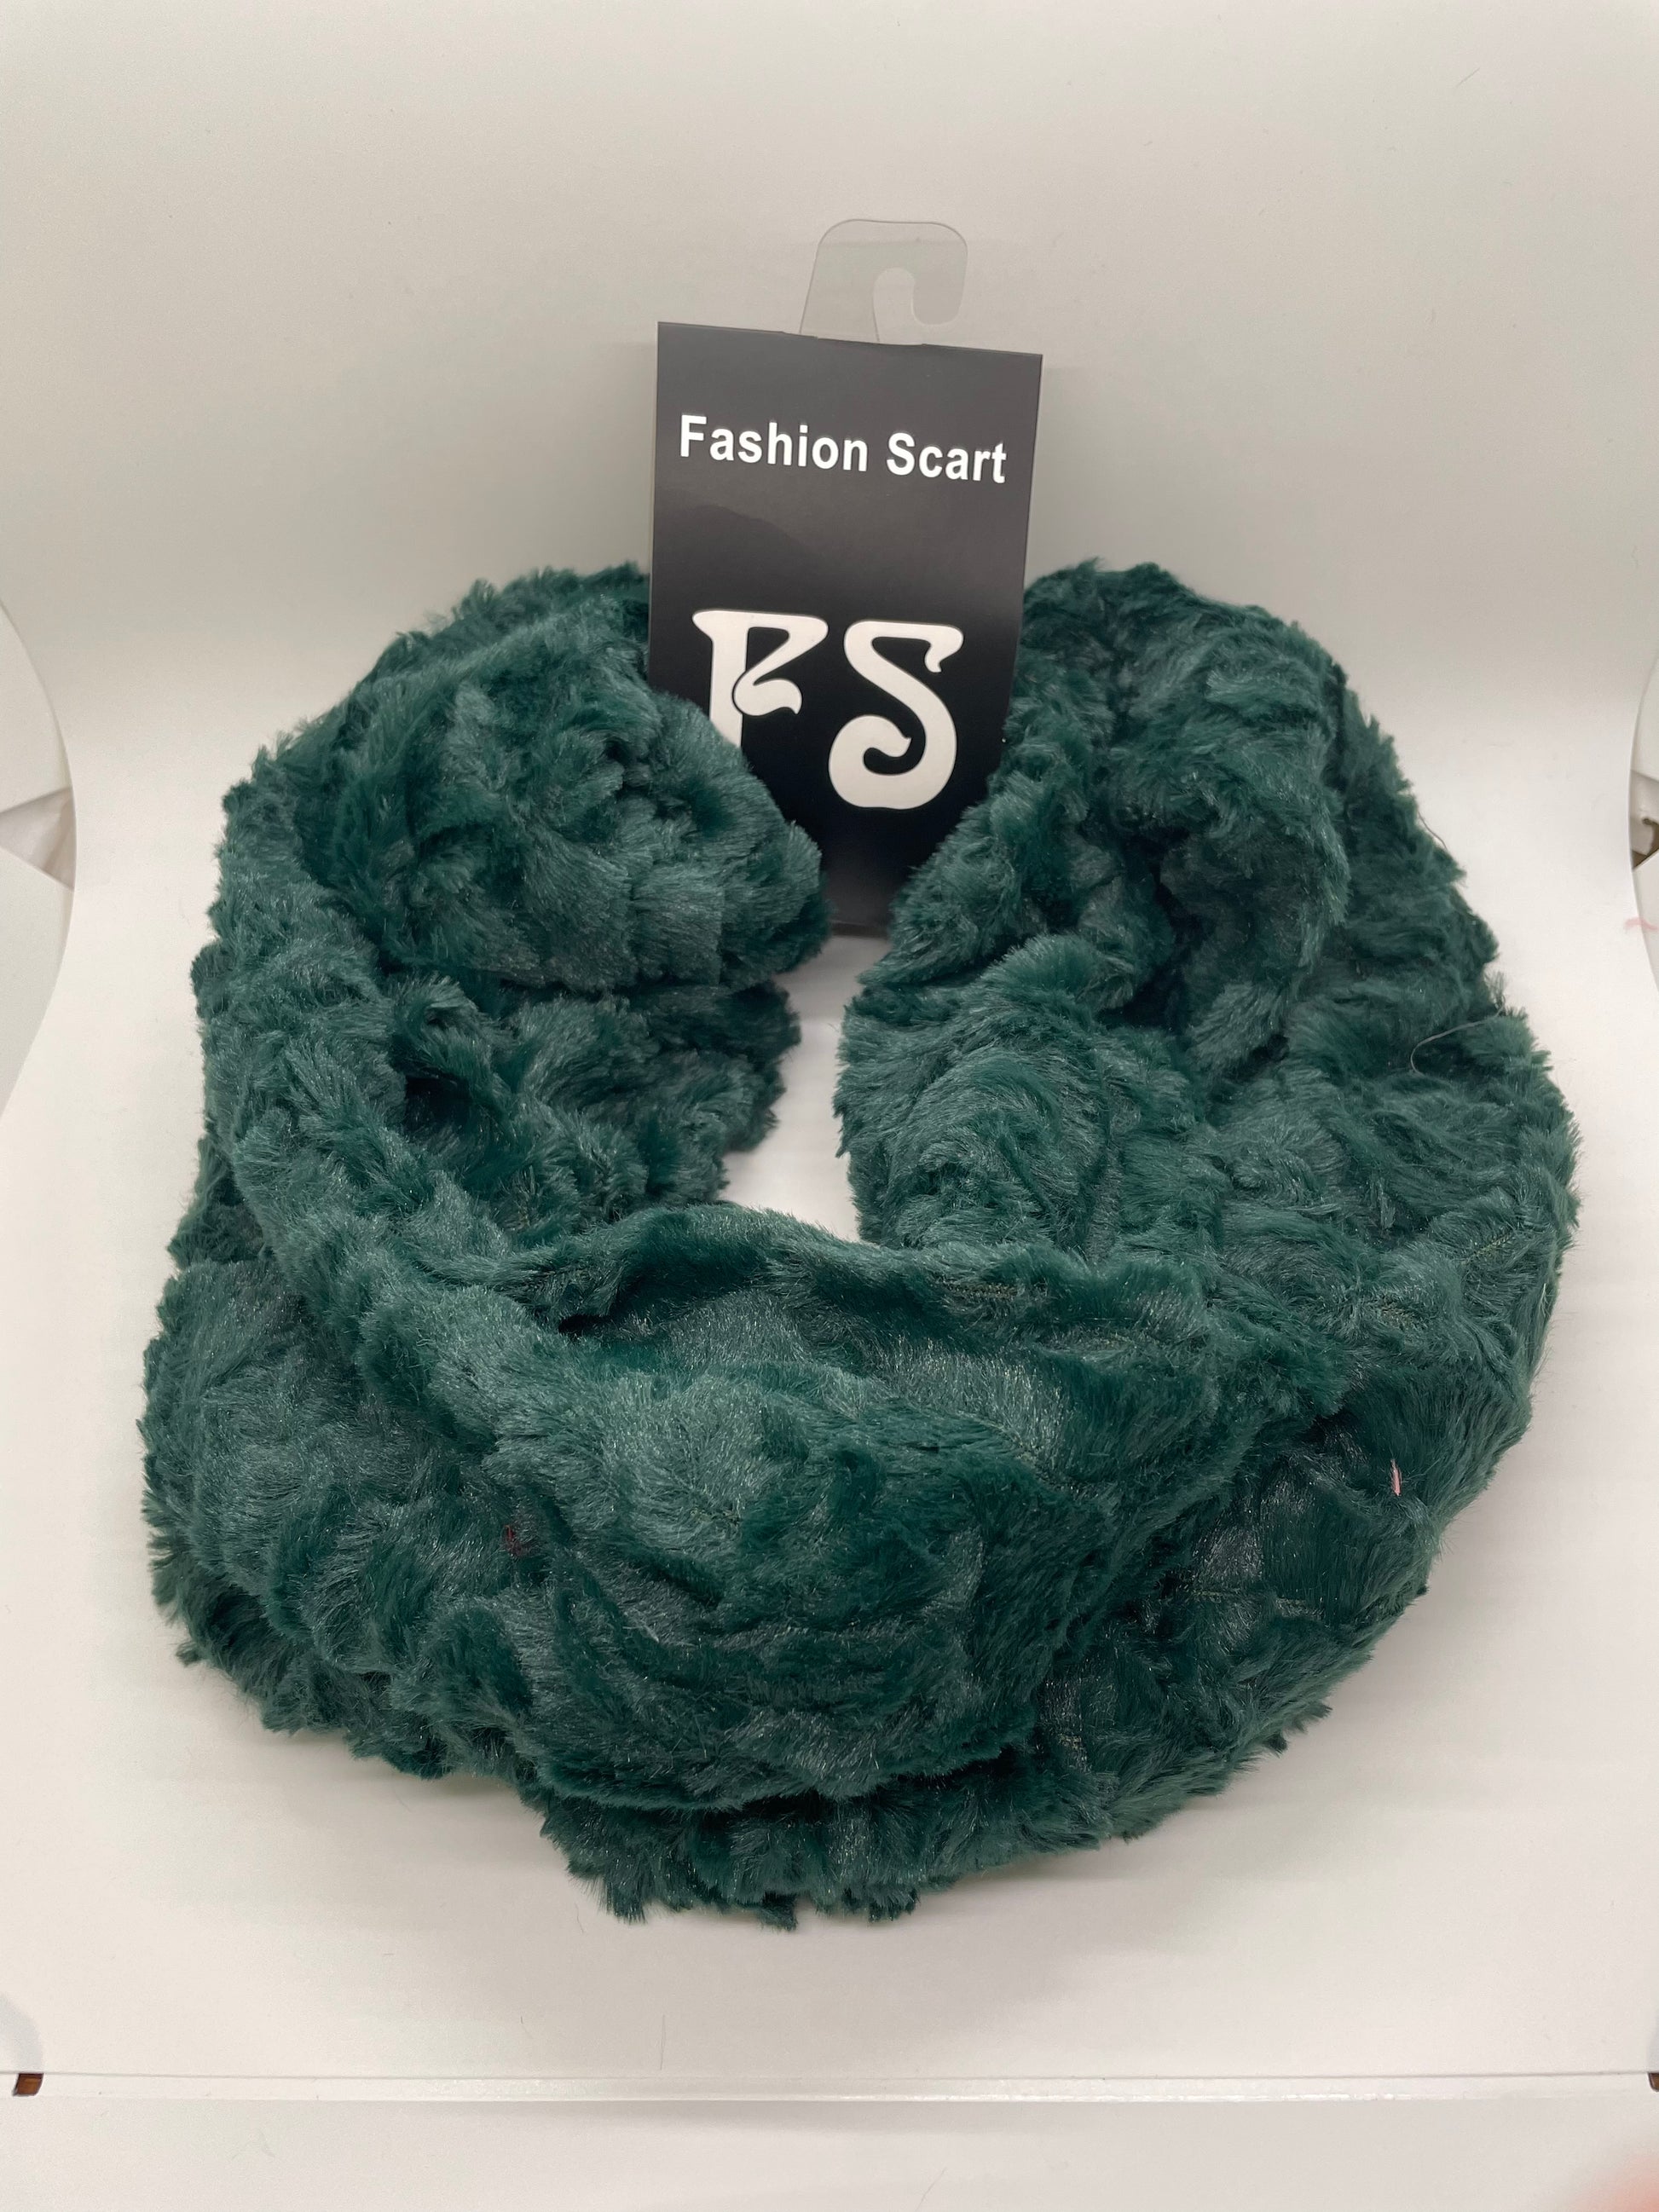 "Black infinity scarf with a knit flower detail and a fold-over cuff"